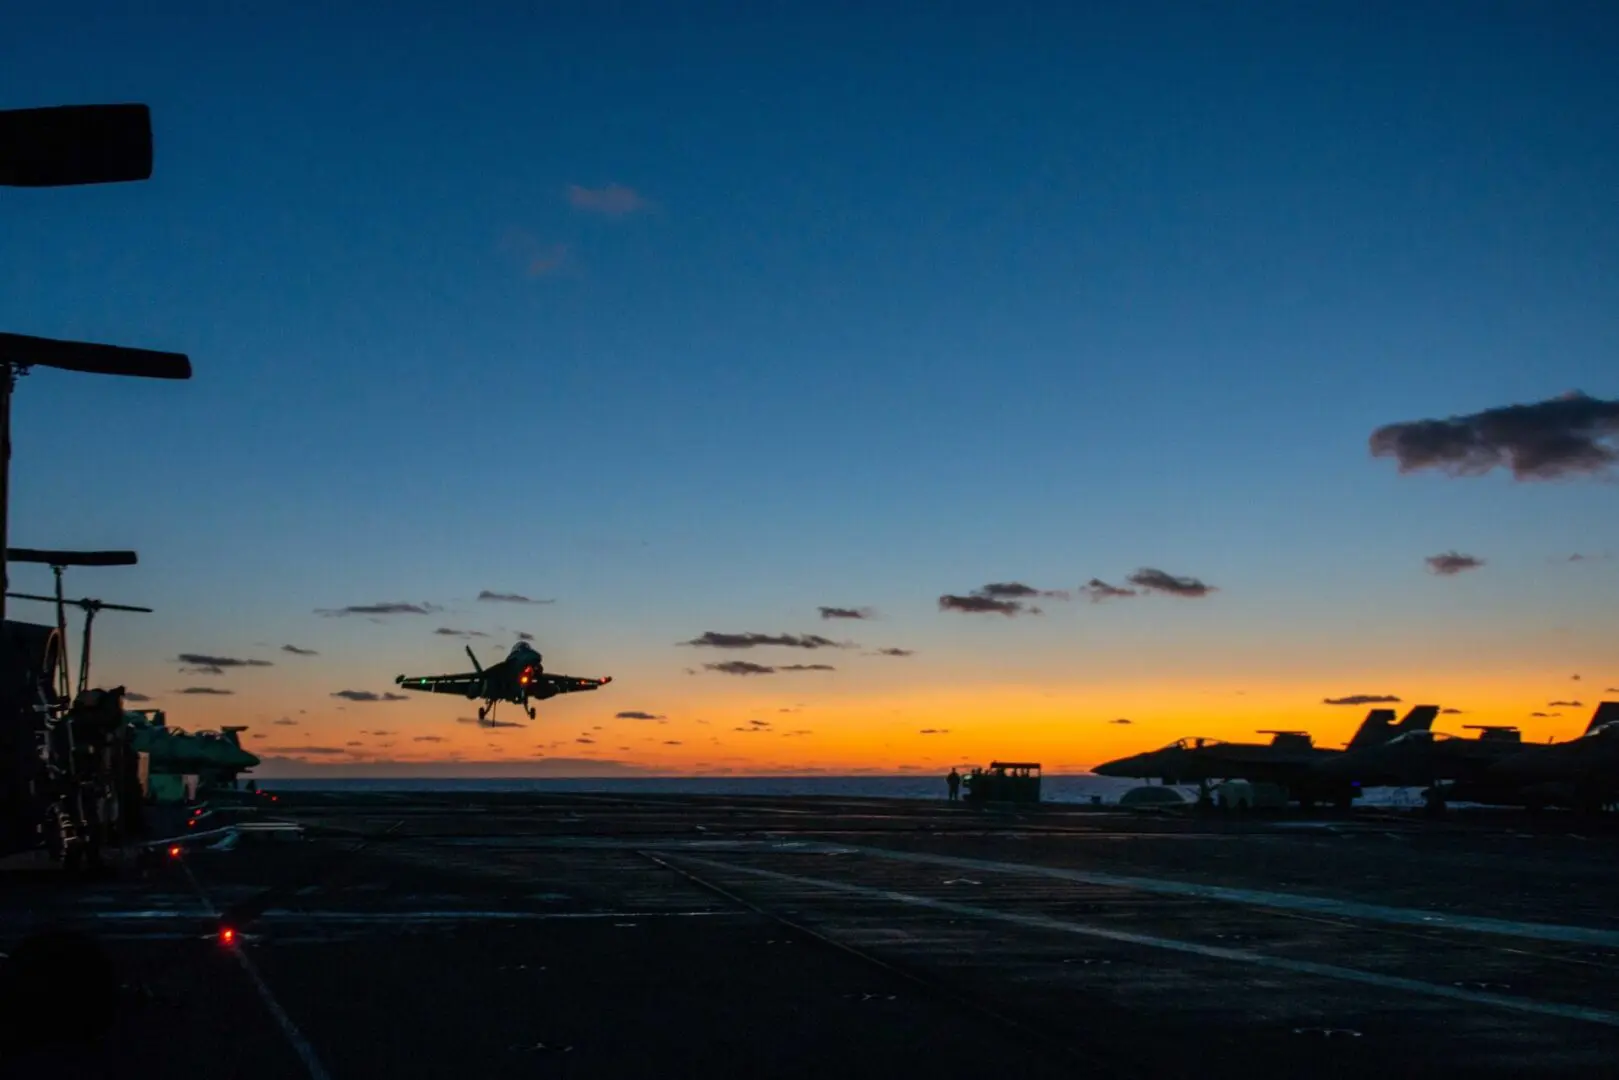 SEA OF JAPAN (Oct. 5, 2022) An F/A-18F Super Hornet, attached to the “Diamondbacks” of Strike Fighter Squadron (VFA) 102, descends for a landing on the flight deck of the U.S. Navy’s only forward-deployed aircraft carrier, USS Ronald Reagan (CVN 76), in the Sea of Japan. The Diamondbacks conduct carrier-based air strikes and strike force escort missions, as well as ship, battle group, and intelligence collection operations. Ronald Reagan, the flagship of Carrier Strike Group 5, provides a combat-ready force that protects and defends the United States, and supports alliances, partnerships and collective maritime interests in the Indo-Pacific region. (U.S. Navy photo by Mass Communication Specialist 2nd Class Michael B. Jarmiolowski)